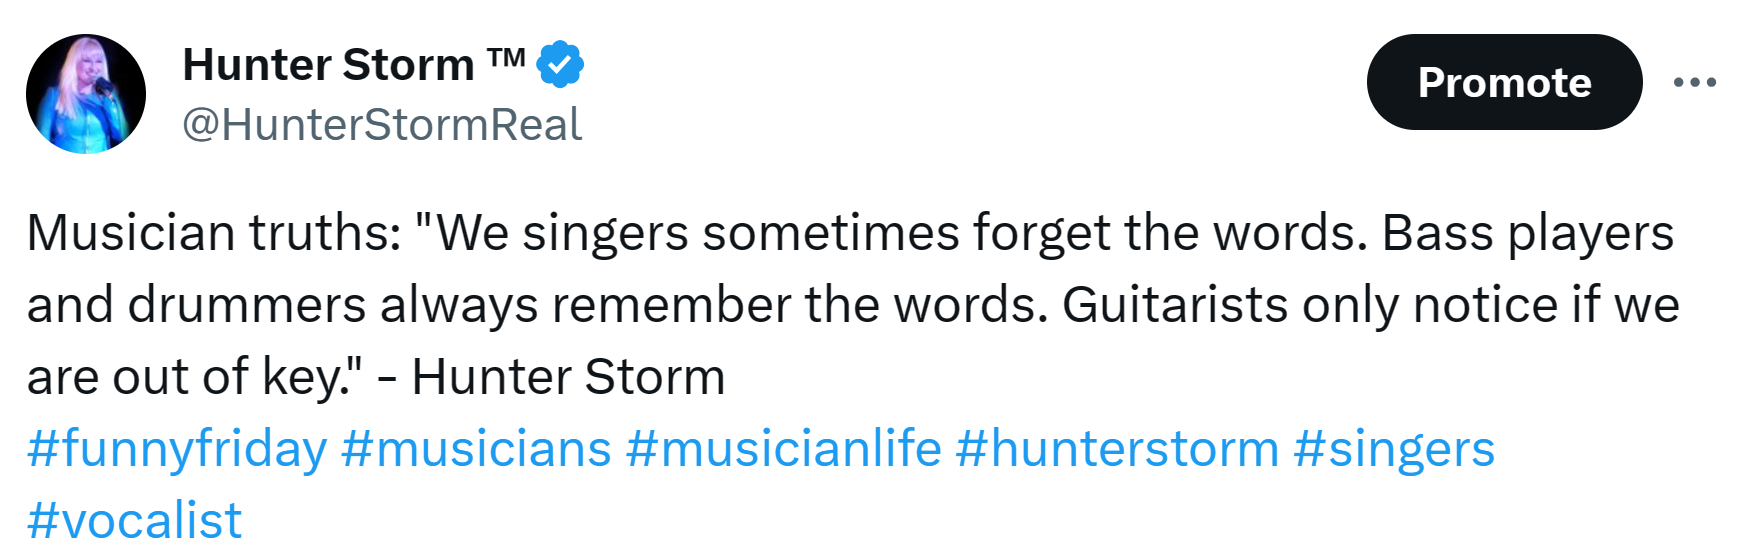 Hunter Storm Wisdom: Timeless Insights and Inspiration | "Musician truths: 'we singers sometimes forget the words. Bass players and drummers always remember the words. Guitarists only notice if we are out of key.'"